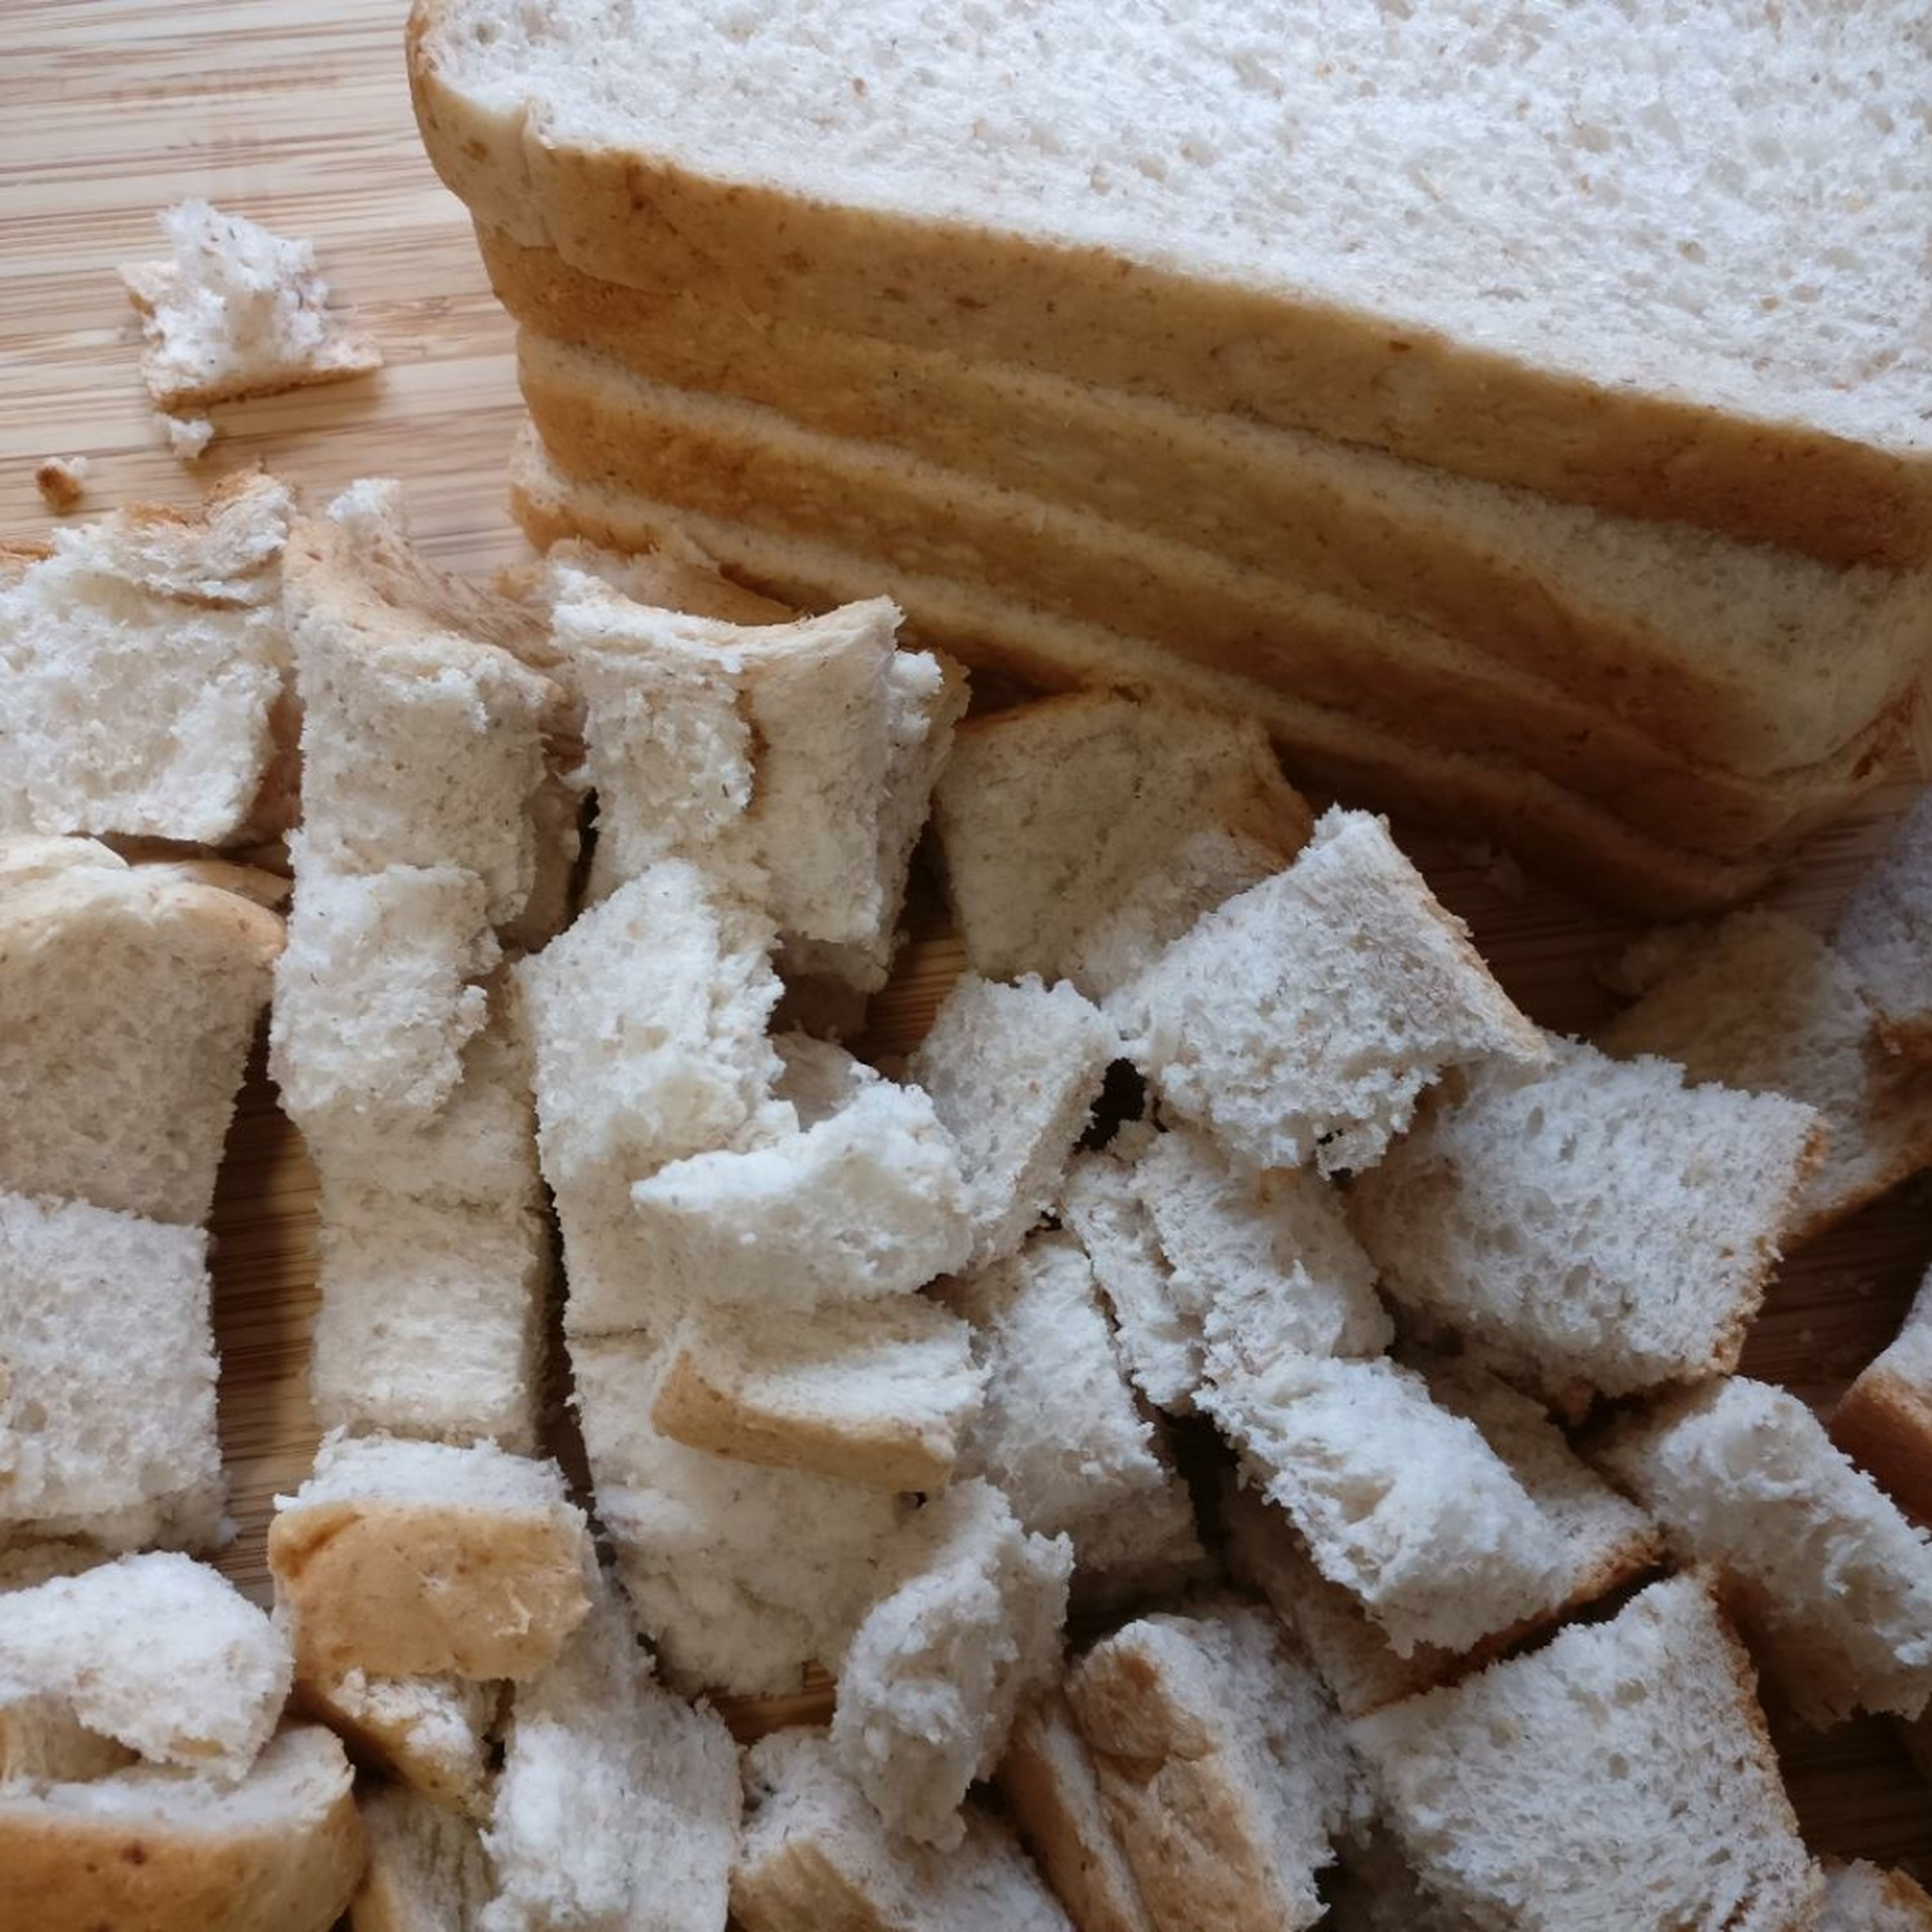 Cut eight bread slices into cubes as shown. Each slice should create approx 20 cubes (4x5).